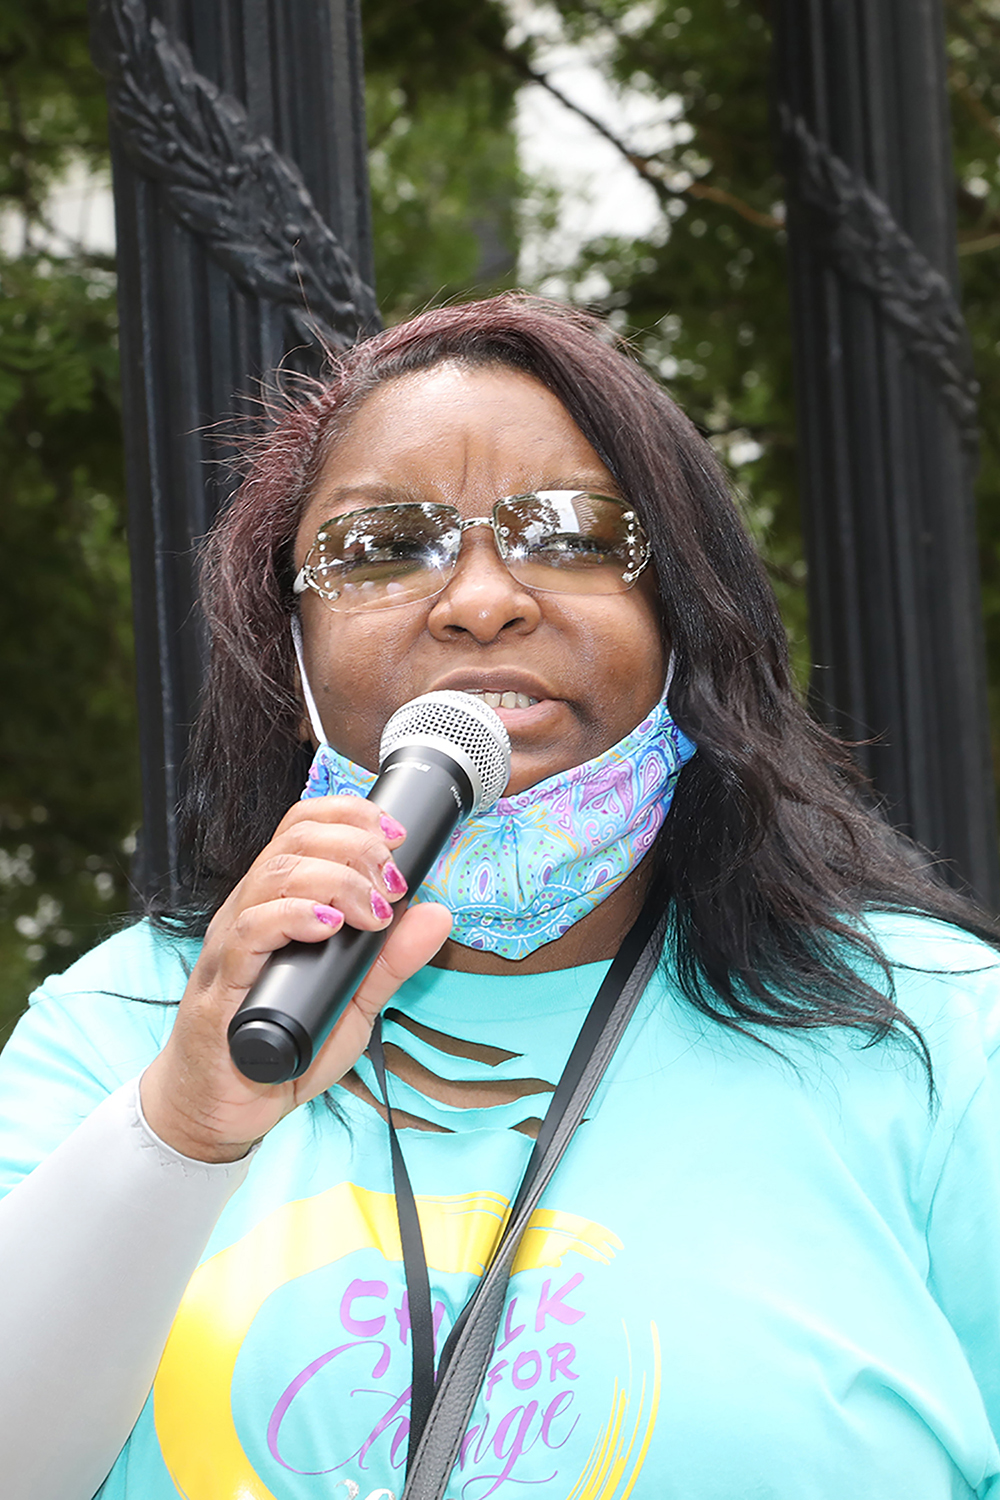 Trust Transfer Project Director Vanessa Ford thanked everyone for coming to the Chalk for Change 2022 taking place at Court Square in Springfield on July 16th. (Ed Cohen Photo)